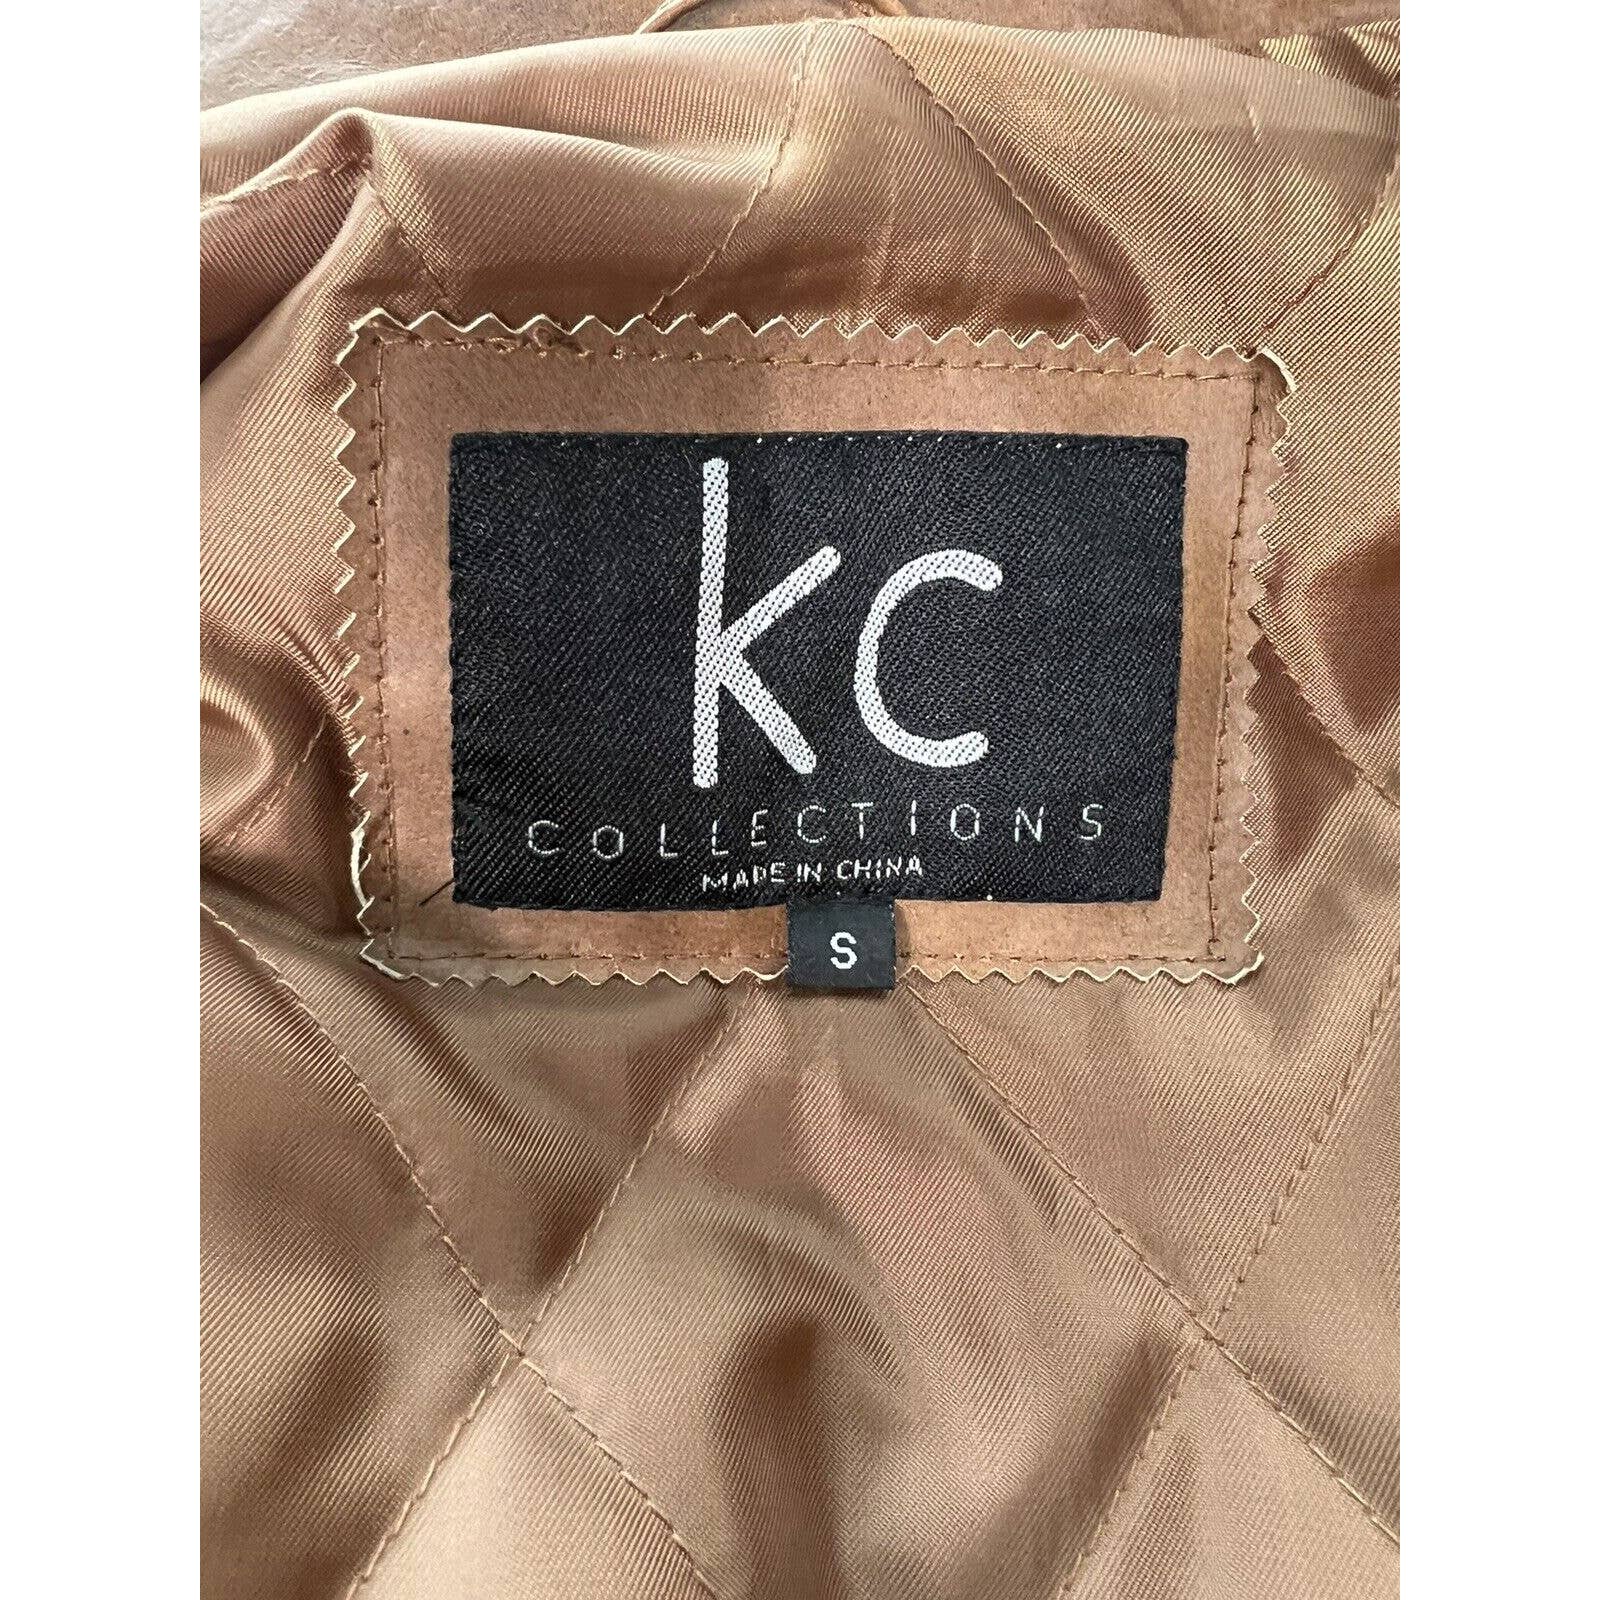 KC Collections Leather Jacket Women’s Small Distressed Caramel Brown Full Zip